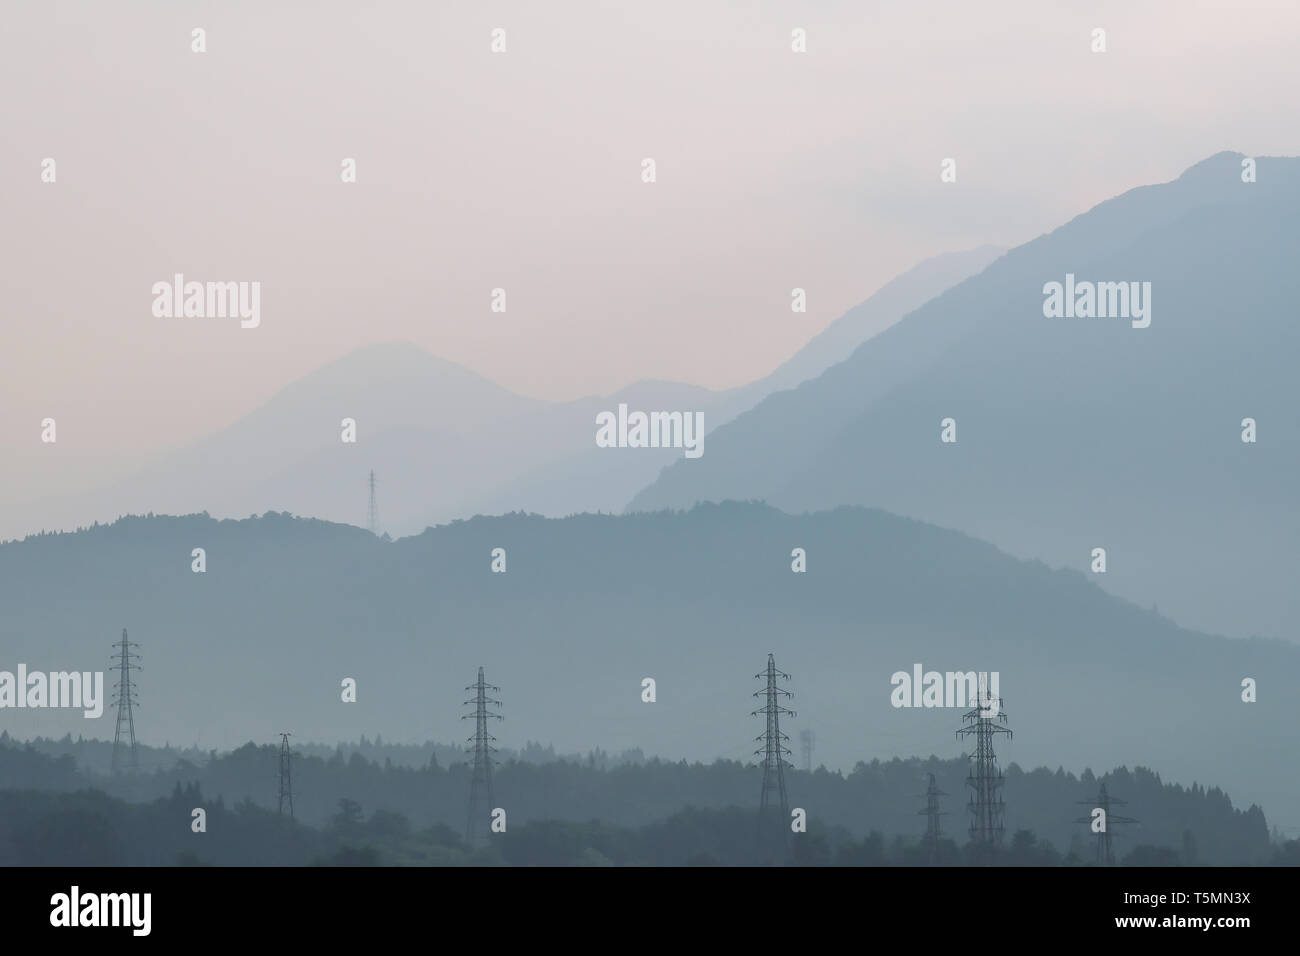 In Japan, the morning and a scenic beautiful view of mountains against the sunlight, electrical pylon and fog. Stock Photo